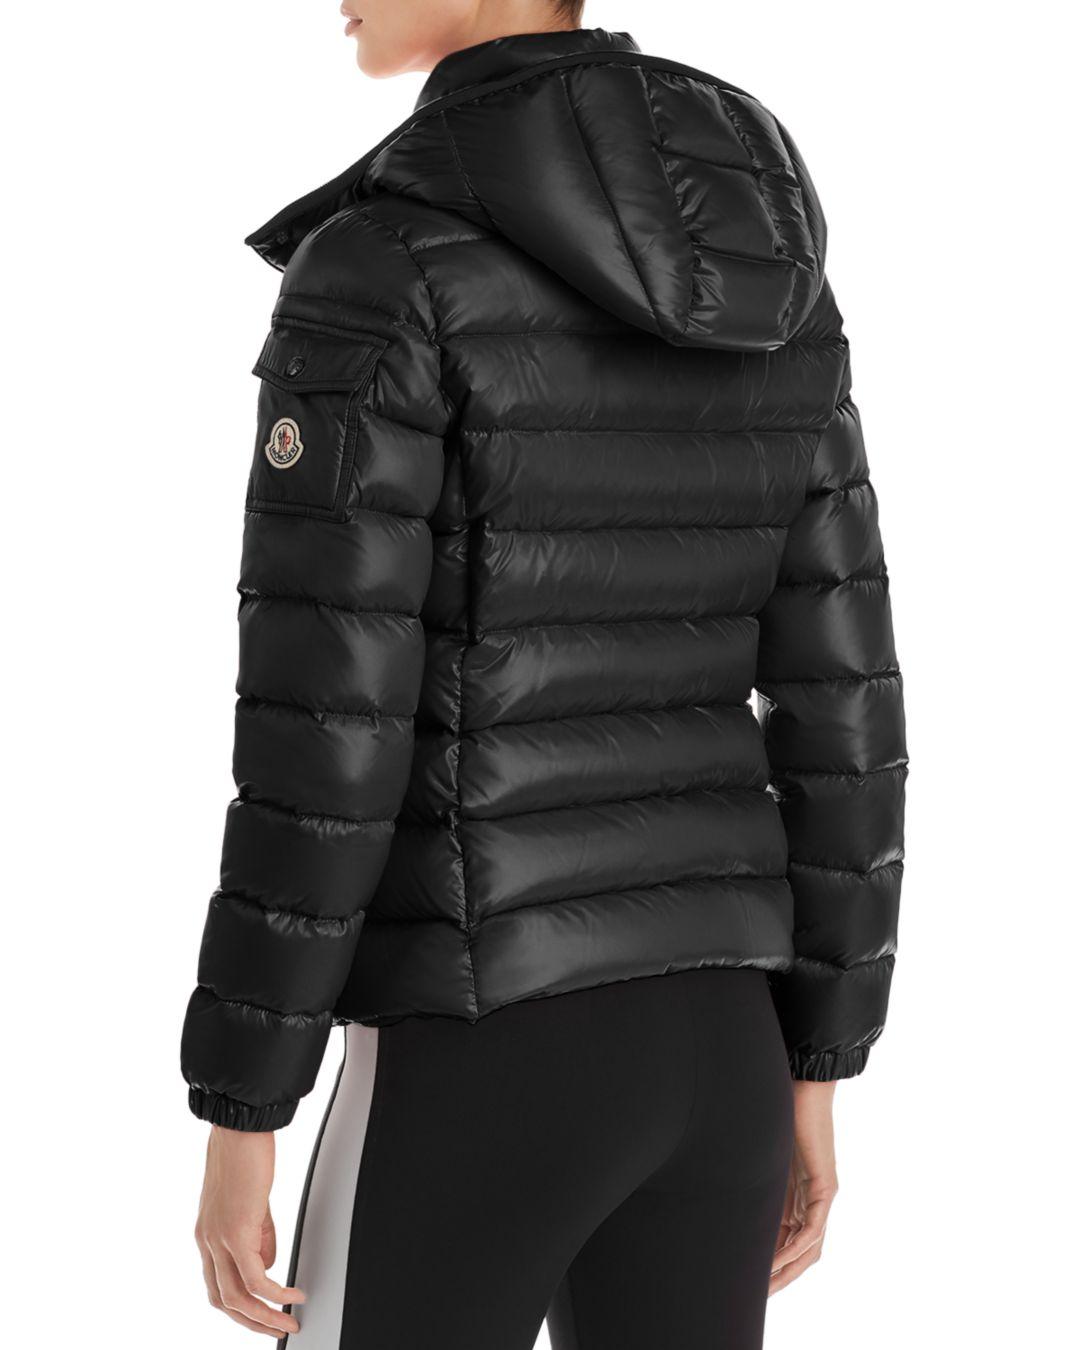 Moncler Bady Slim Short Down Jacket, Quilted Pattern in Black - Lyst